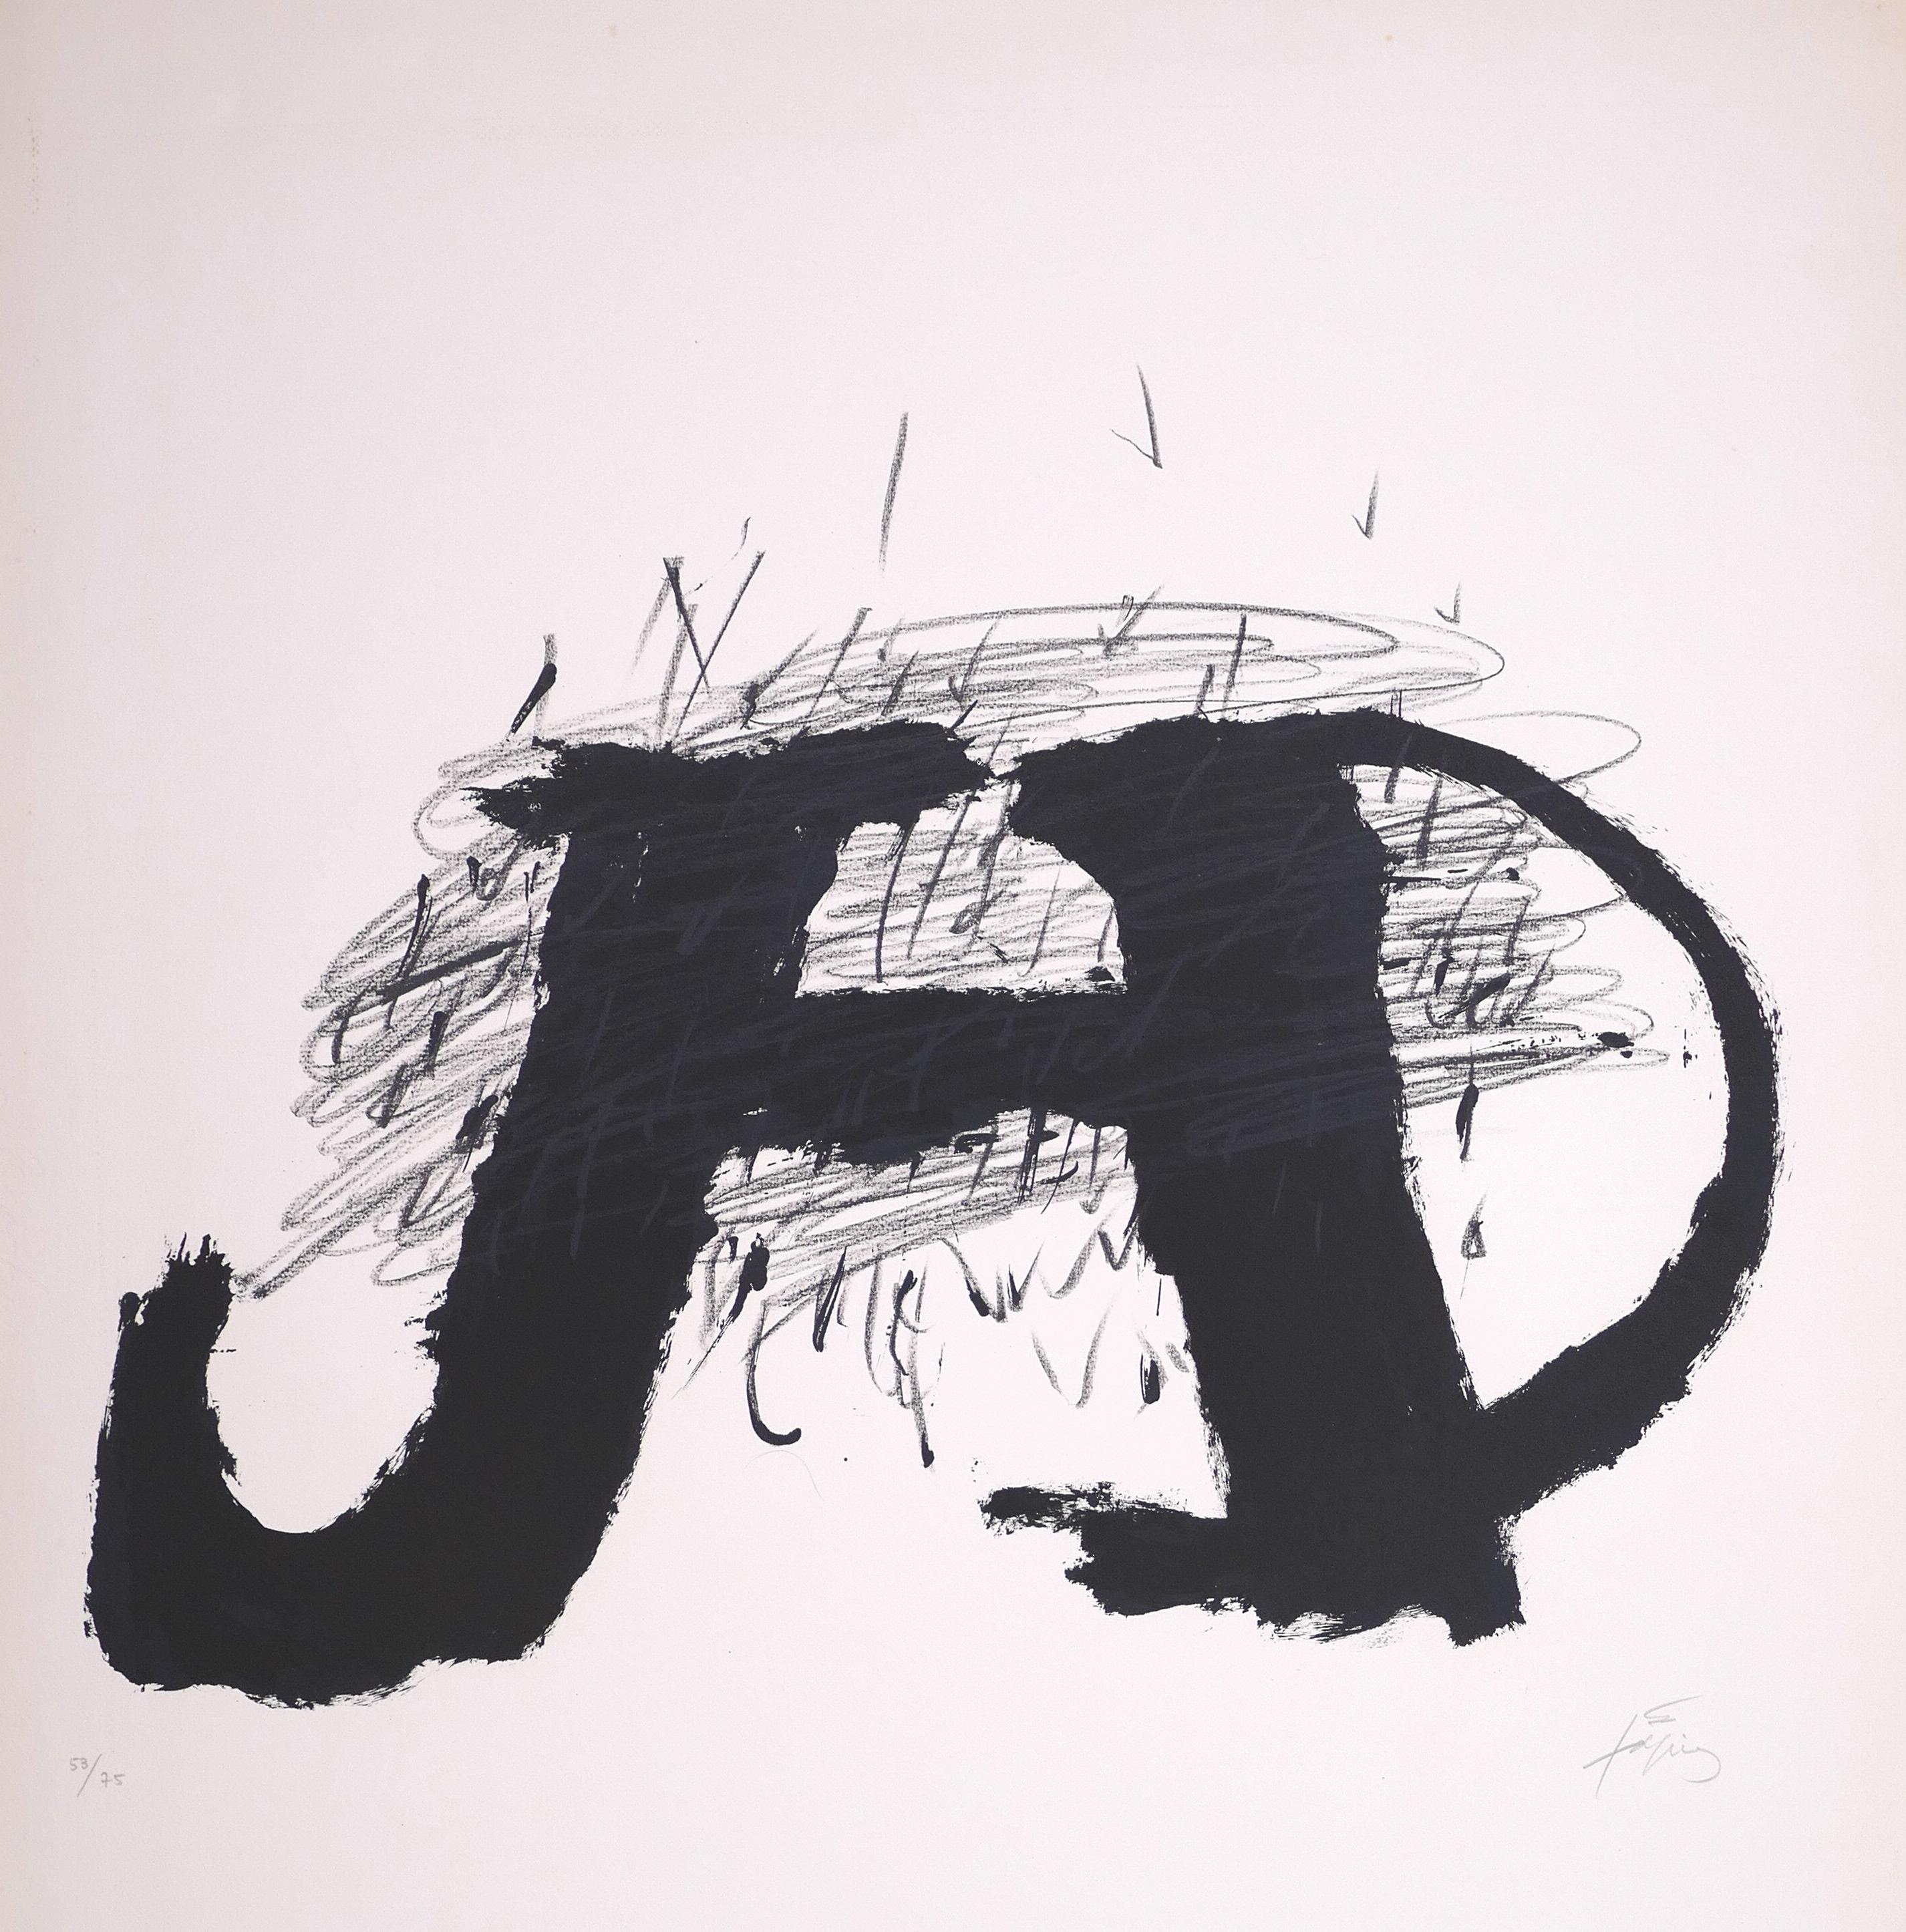 Untitled - Original Lithograph by Antoni Tapies - 1979 - Print by Antoni Tàpies